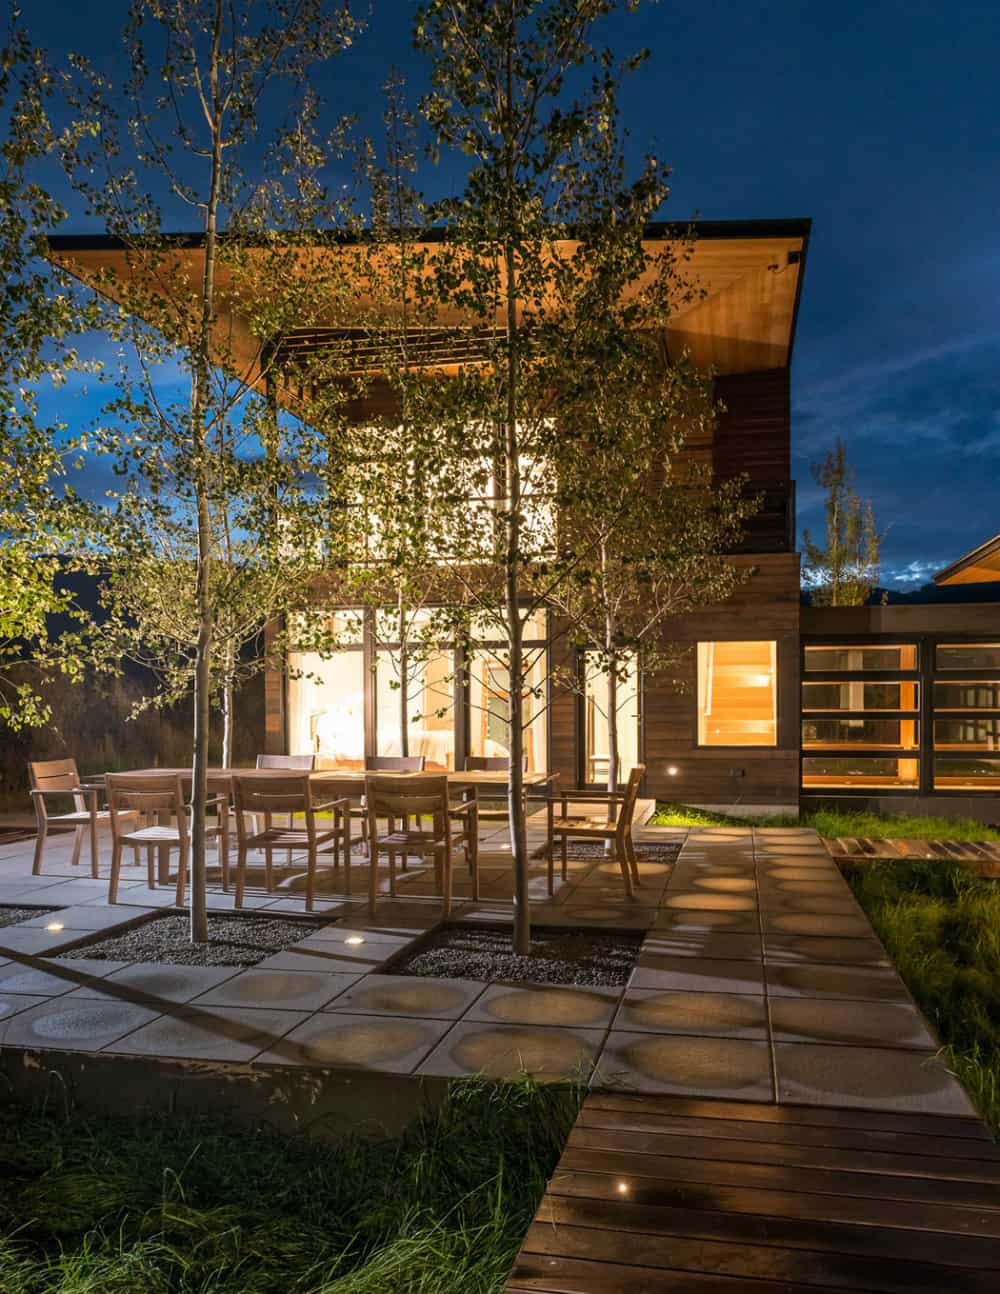 Outdoor dining room gets illlumination from numerous windows in the evening